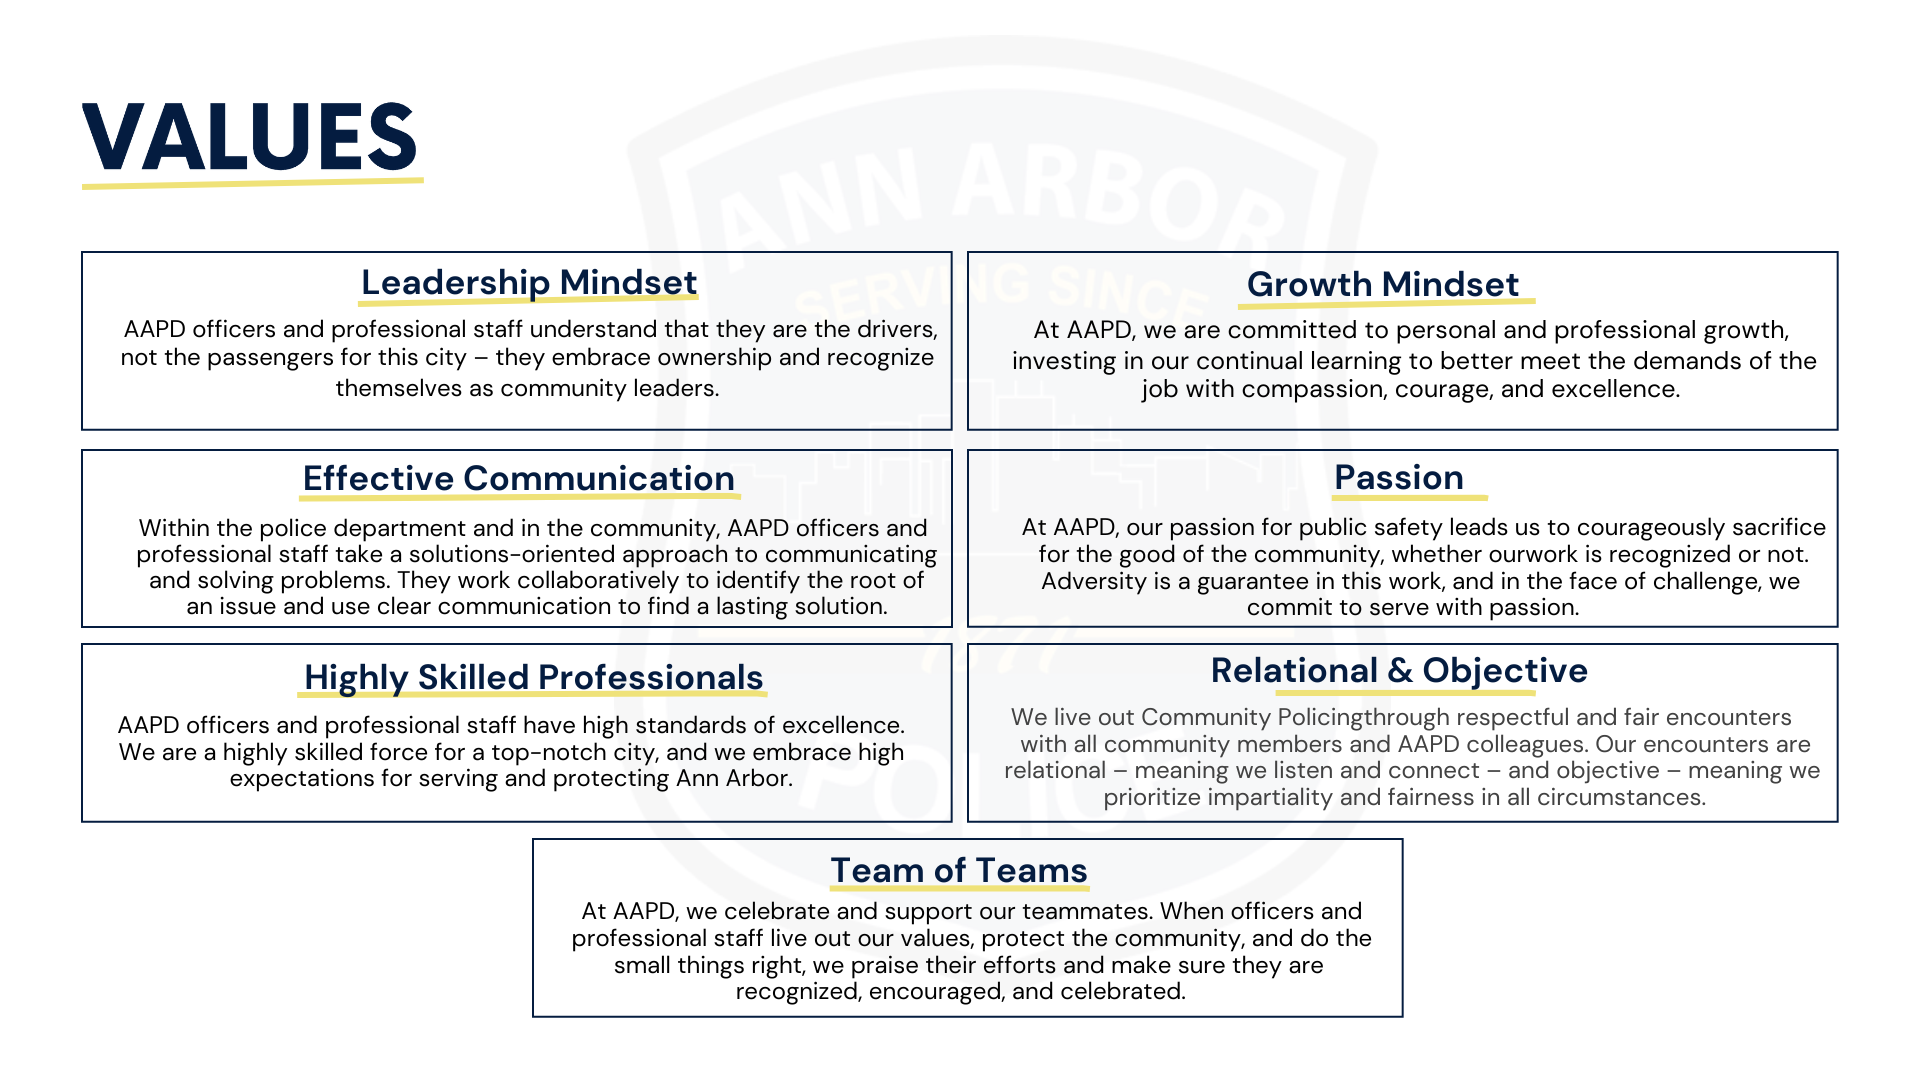 Values: leadership mindset, growth mindset, effective communication, passion, highly skilled professionals, relational and objective, team of teams